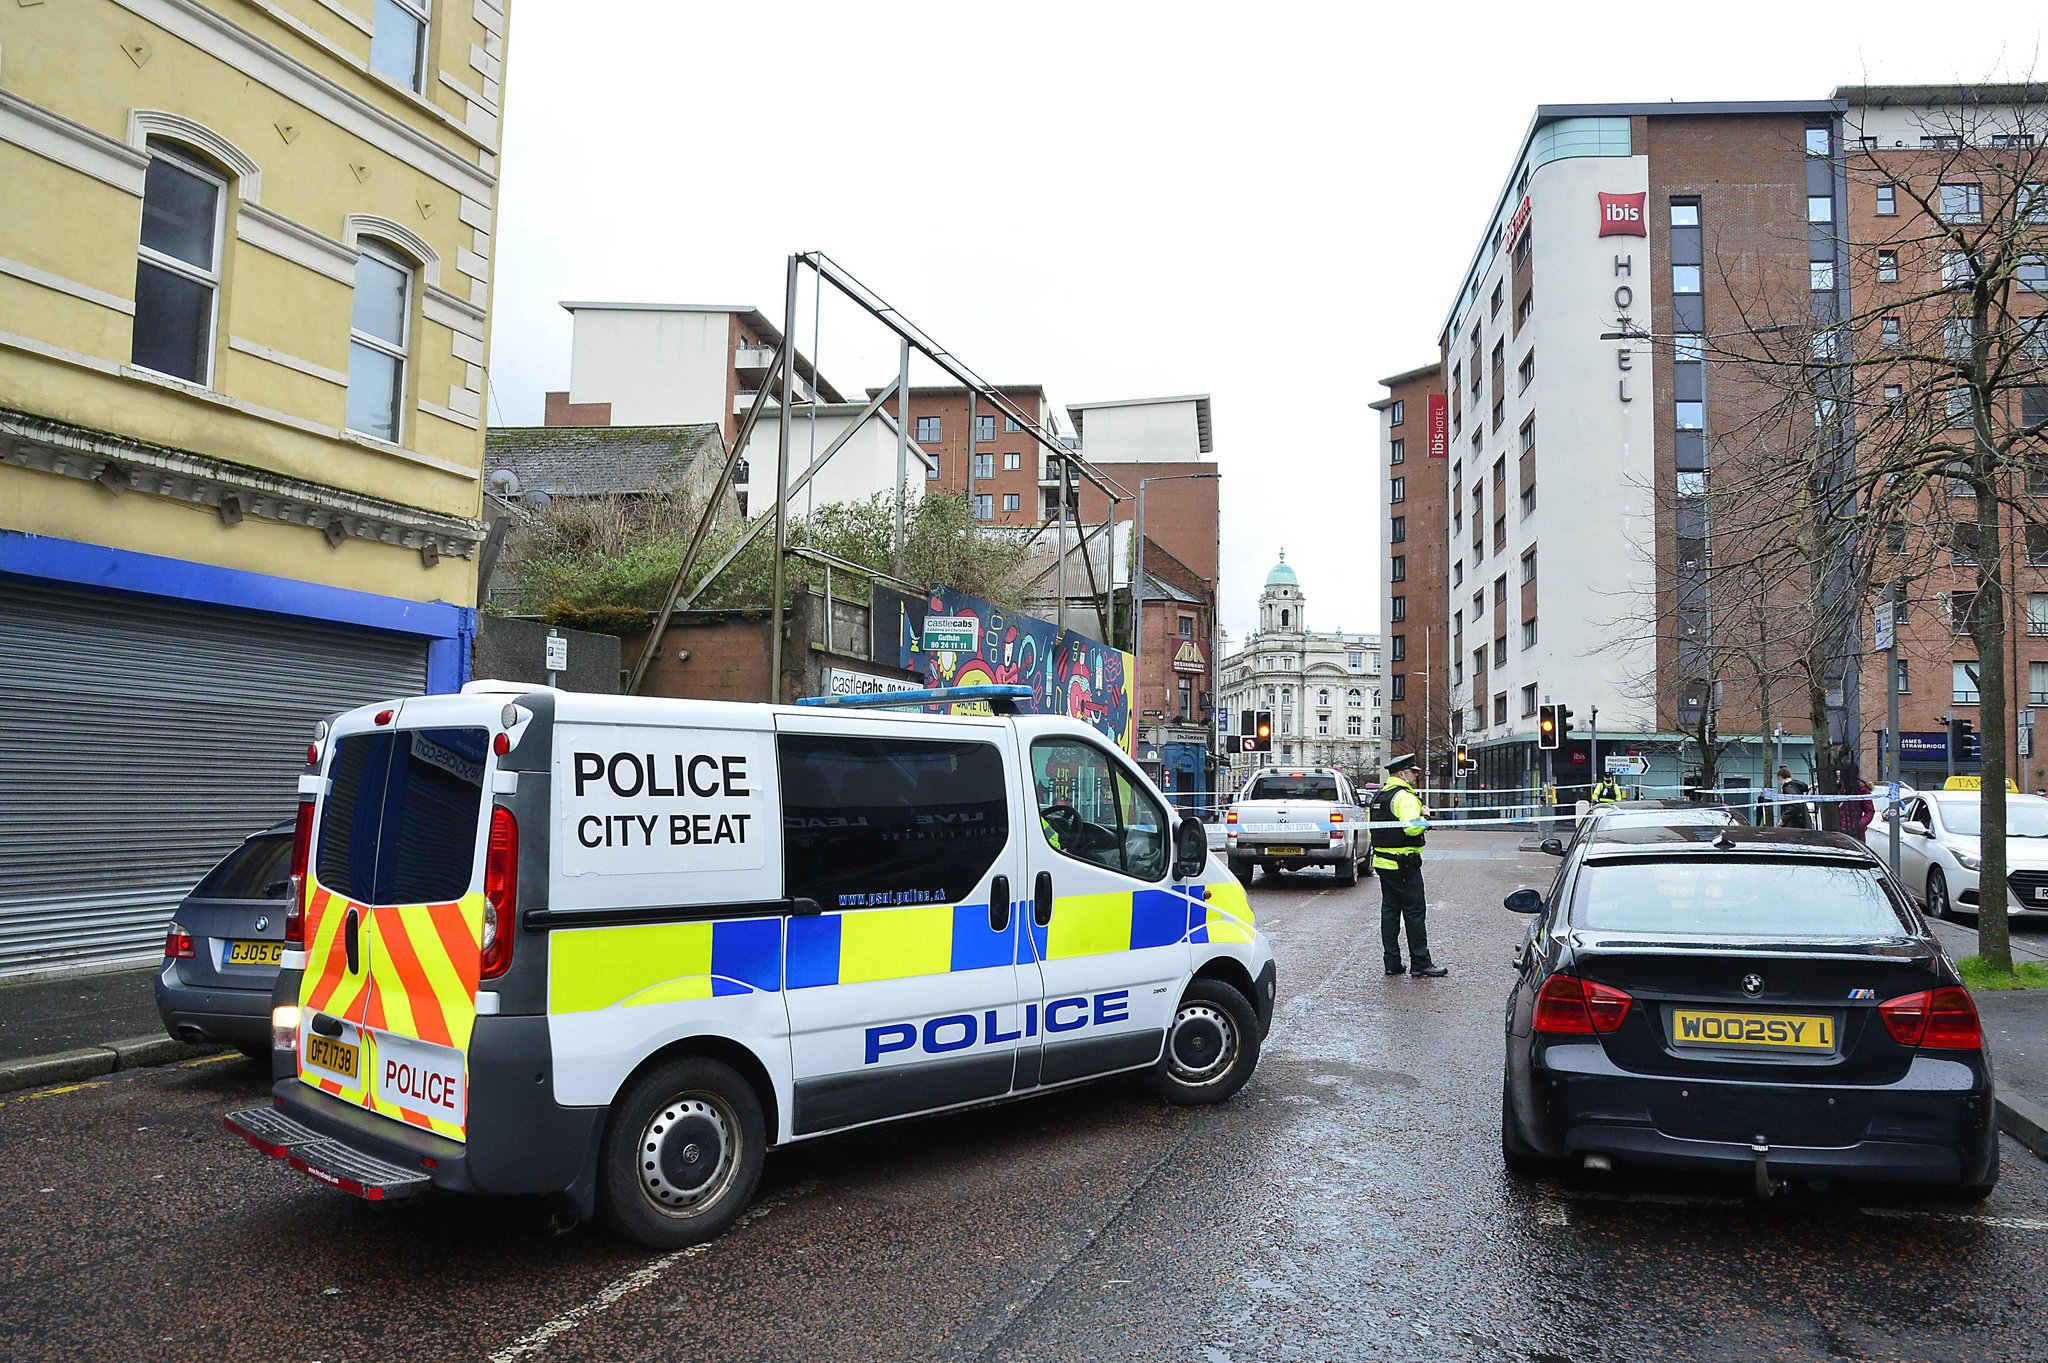 In PICTURES: City street closed after ‘partial collapse of building wall’